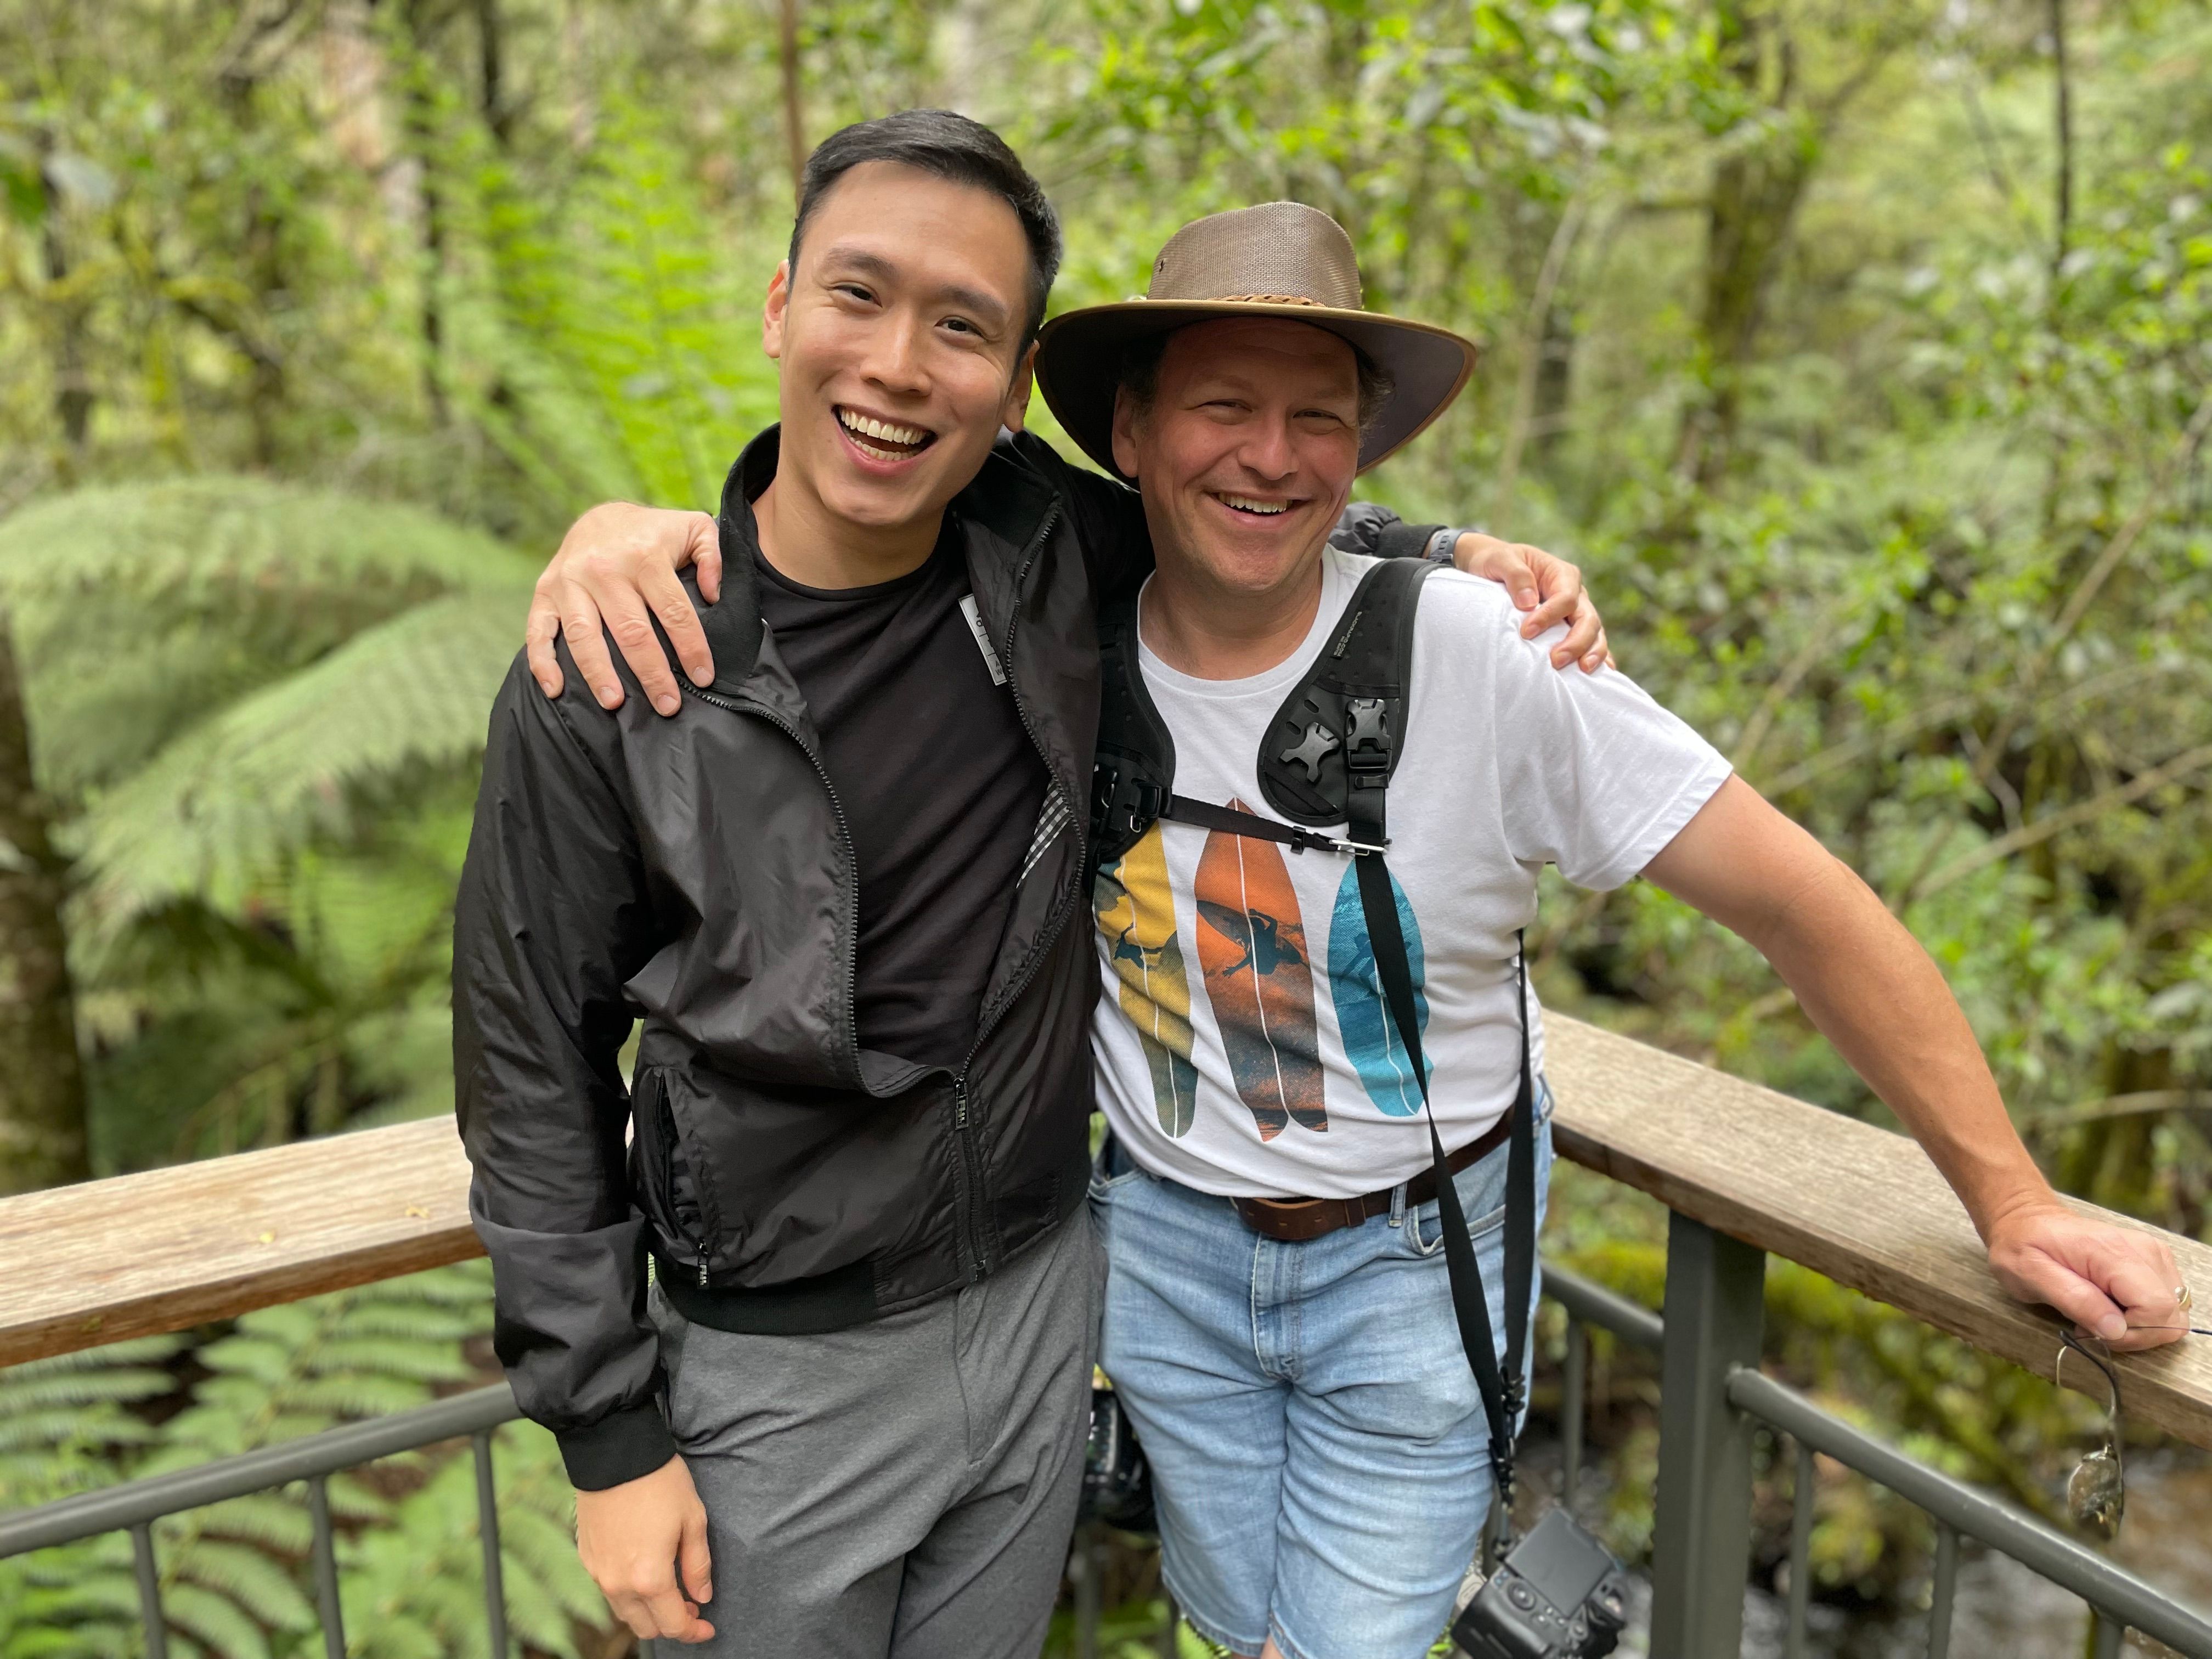 Bill and a colleague posing together on a nature hike in Australia